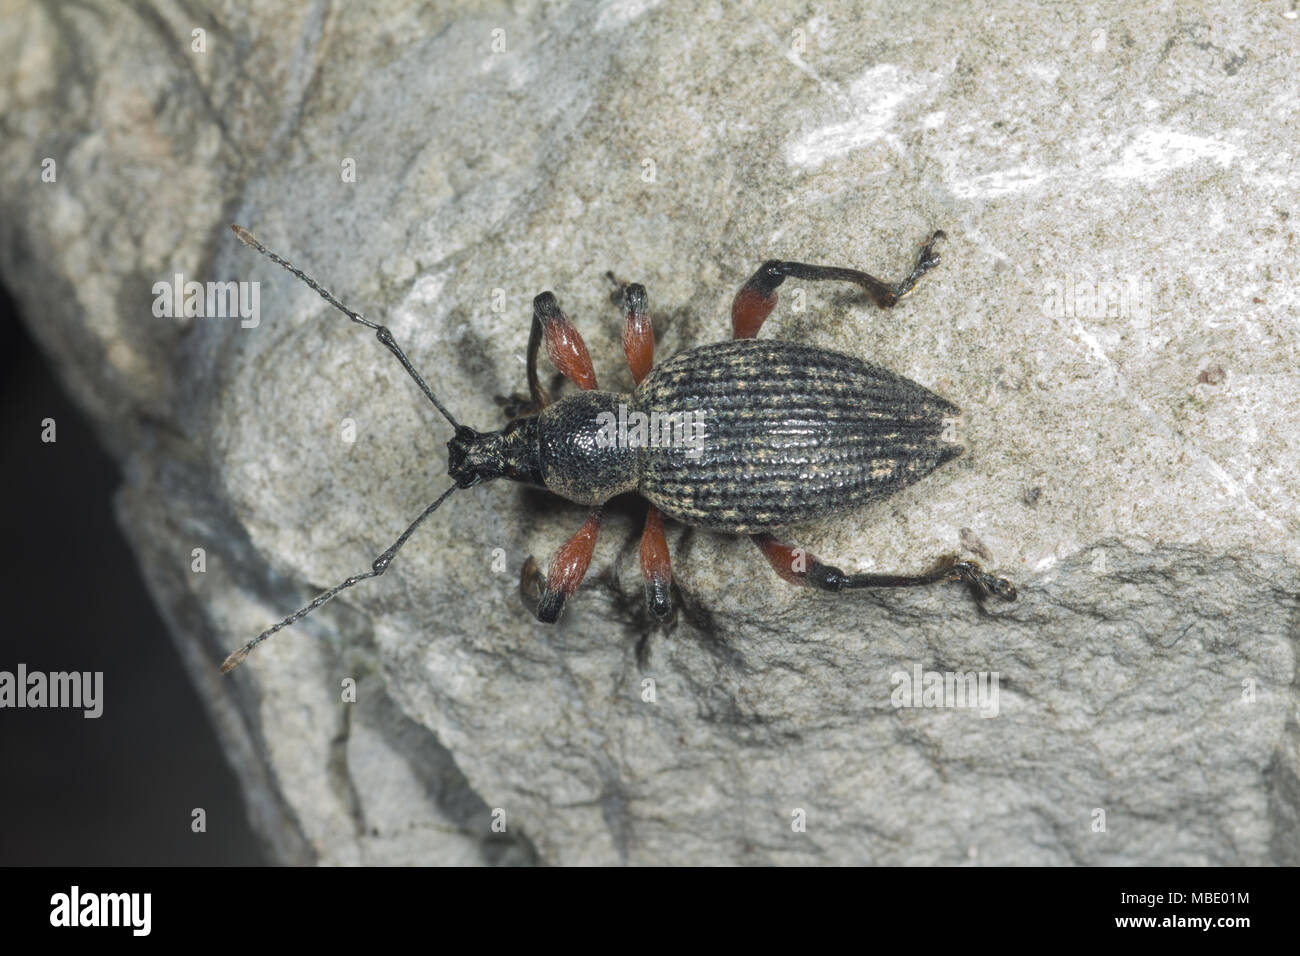 A black and orange weevil (Curculionoidea) on a rock in Italy Stock Photo